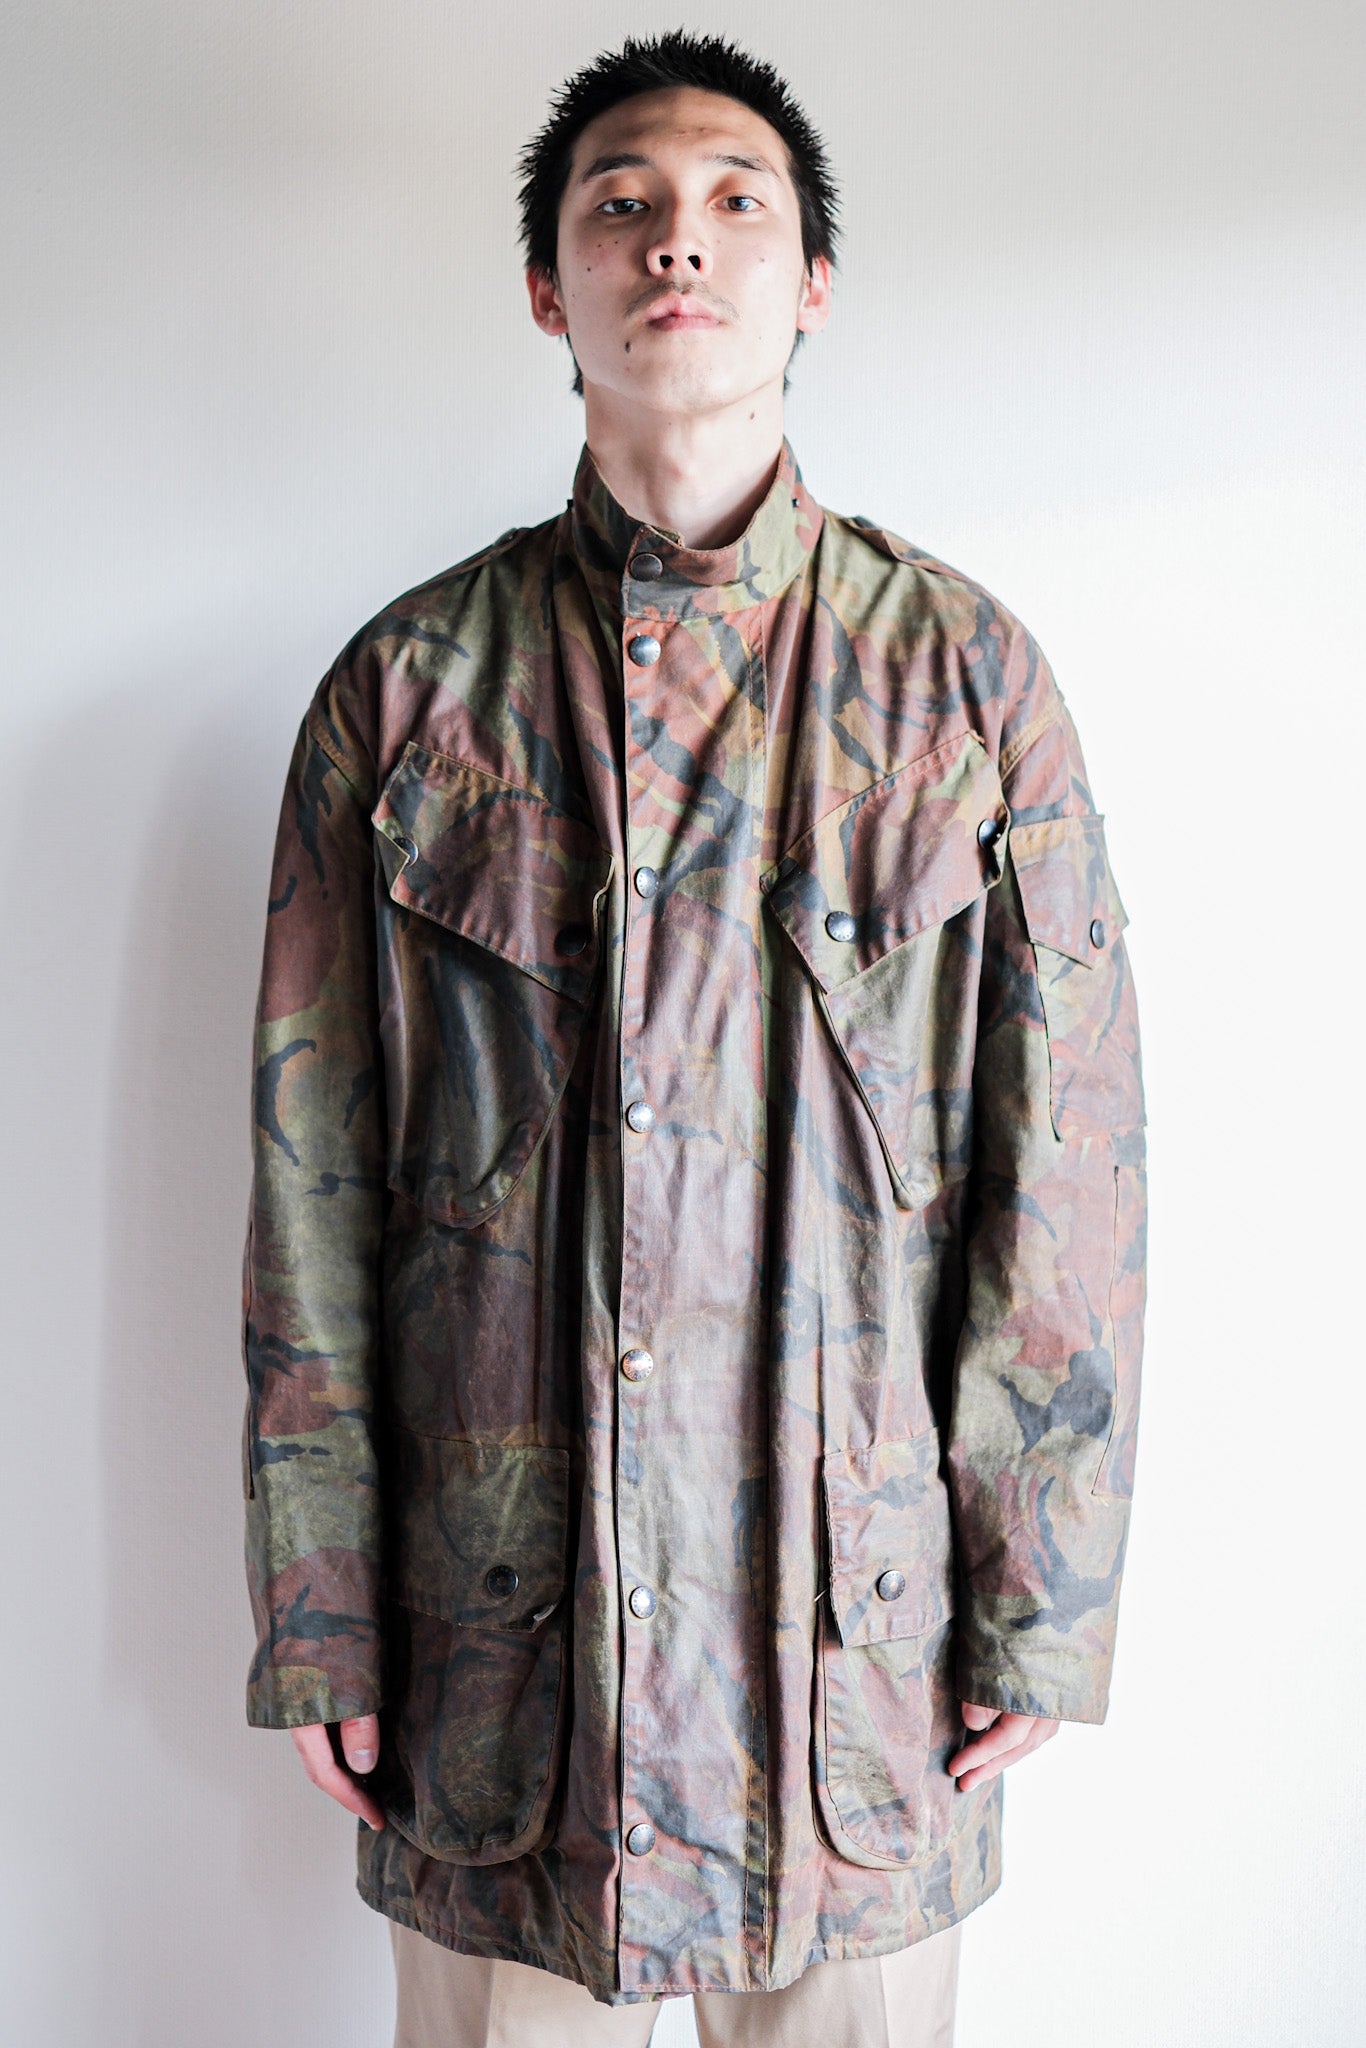 【~80's】Vintage Barbour DPM Camouflage Waxed Jacket “THE MILITARY" “2nd Model” 2 Crest Size.42